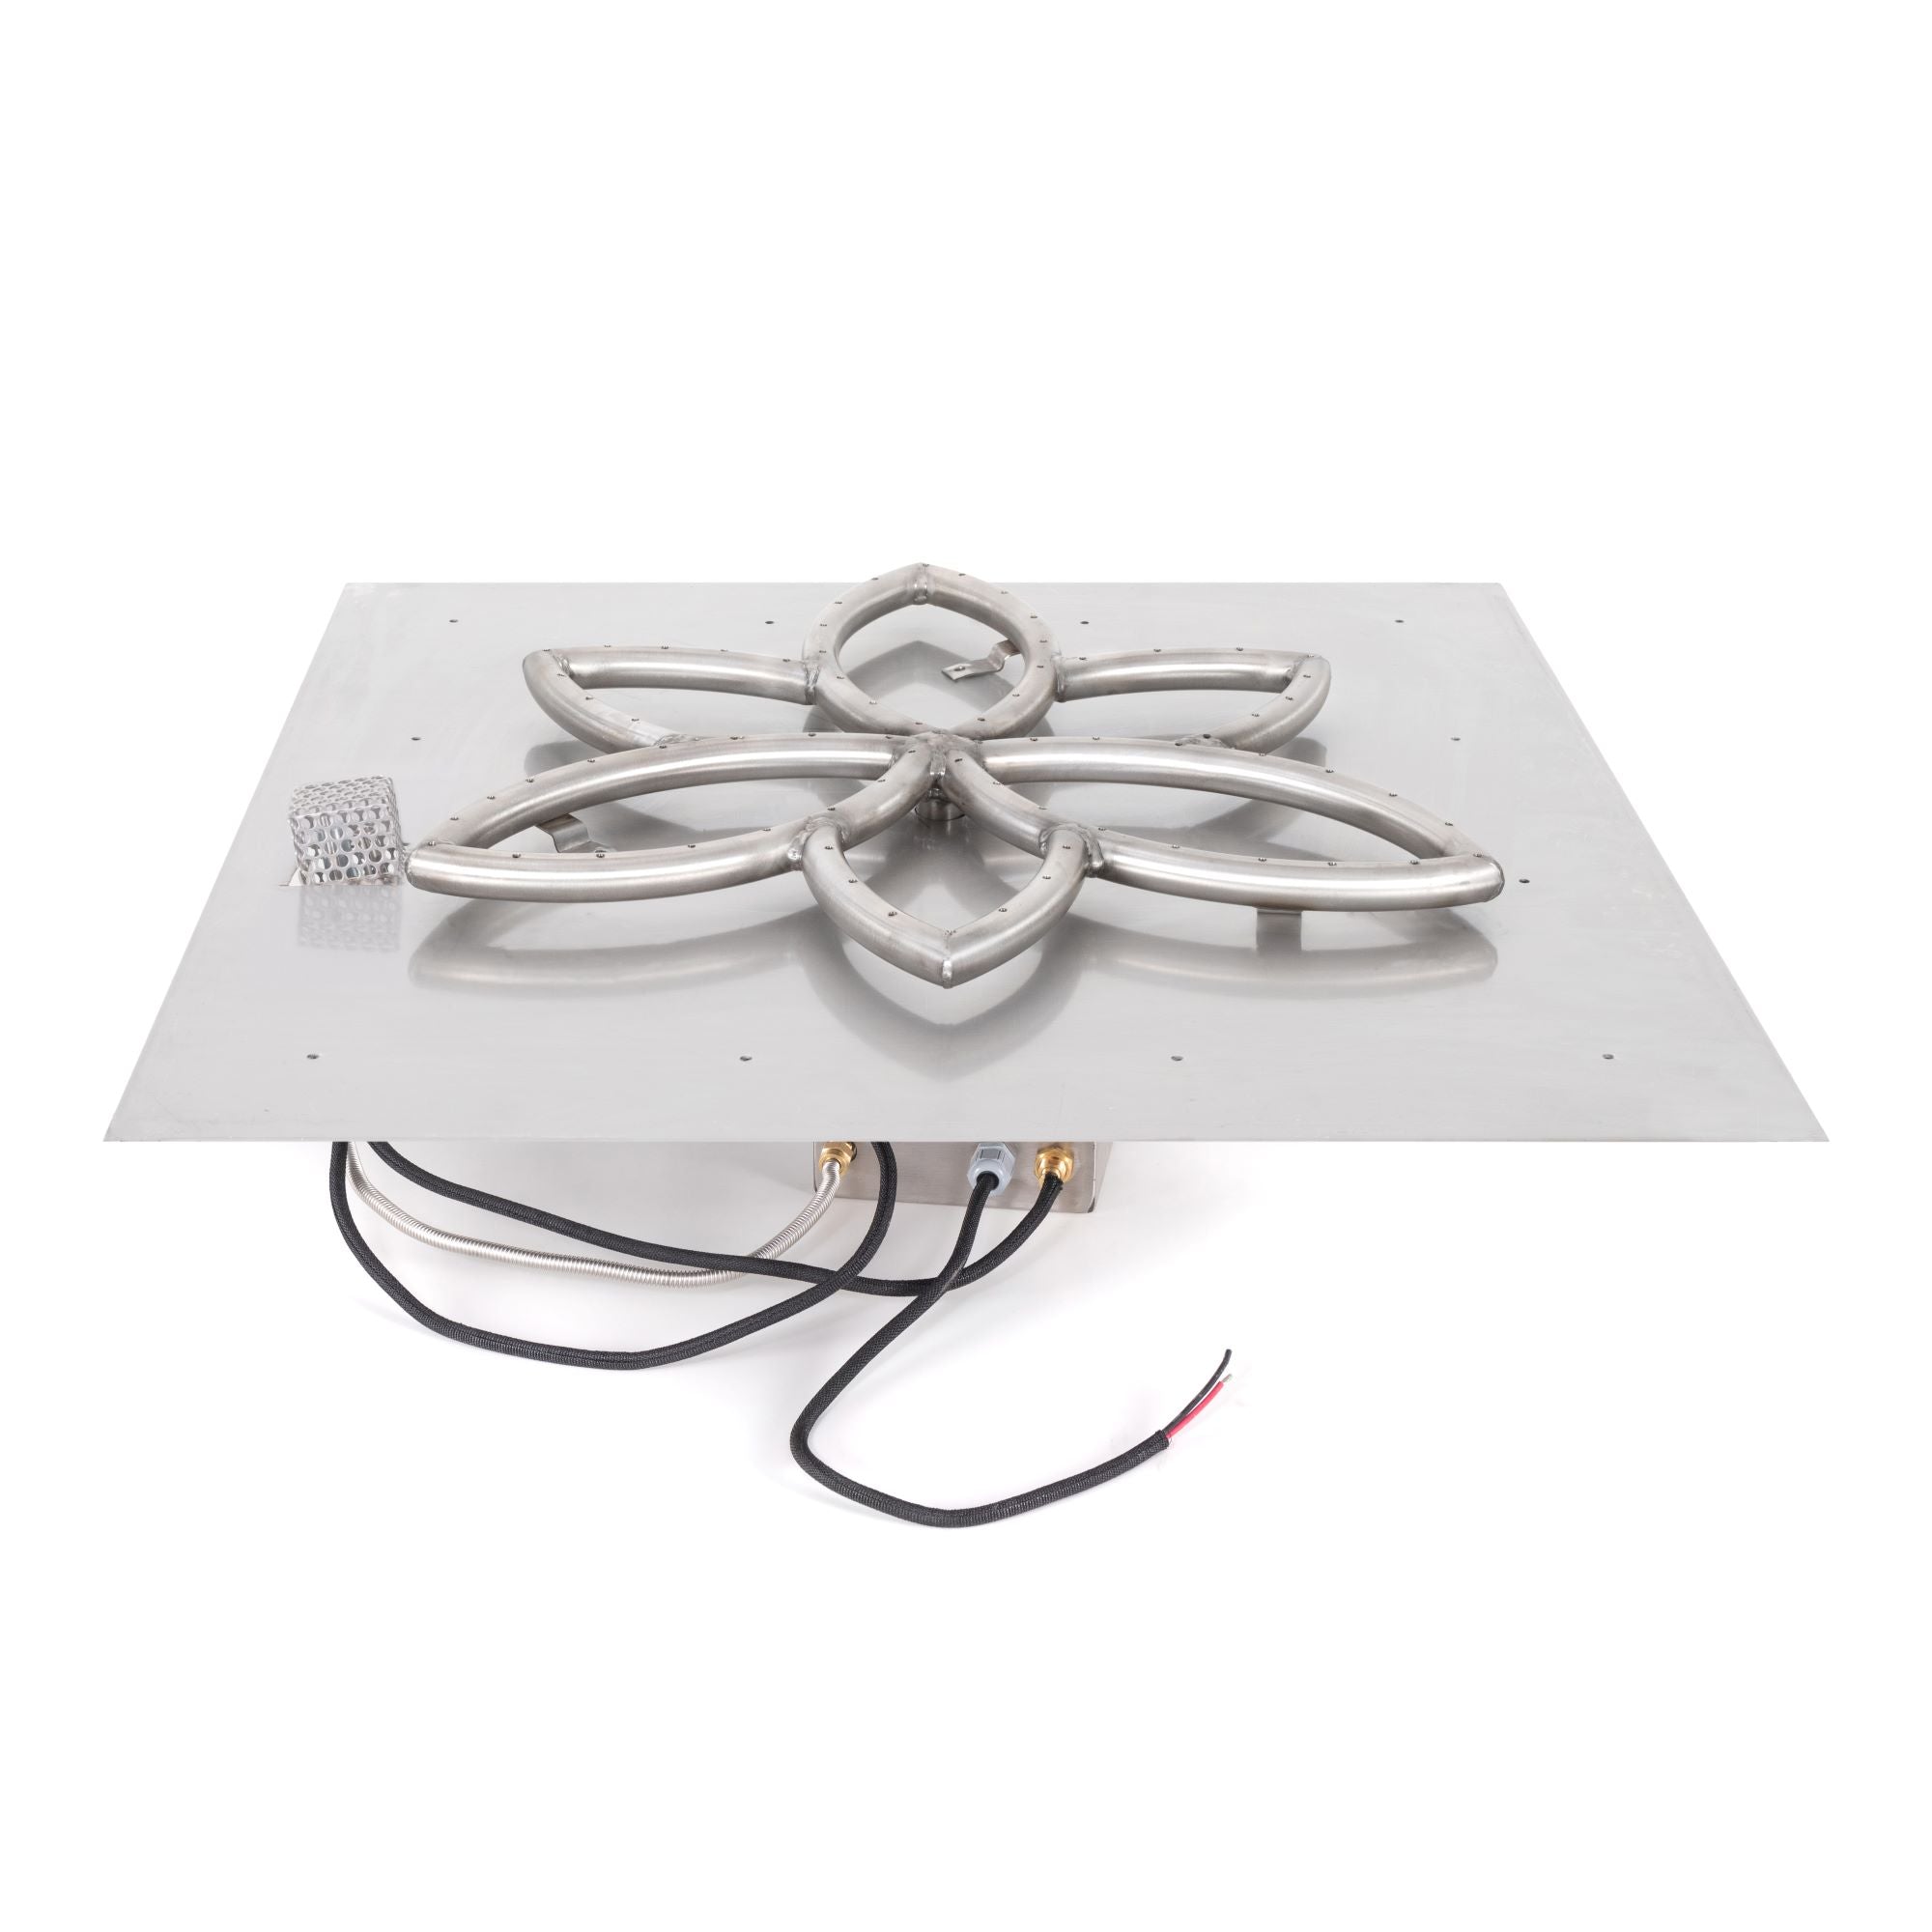 The Outdoor Plus Square Flat Pan with Stainless Steel Lotus Burner